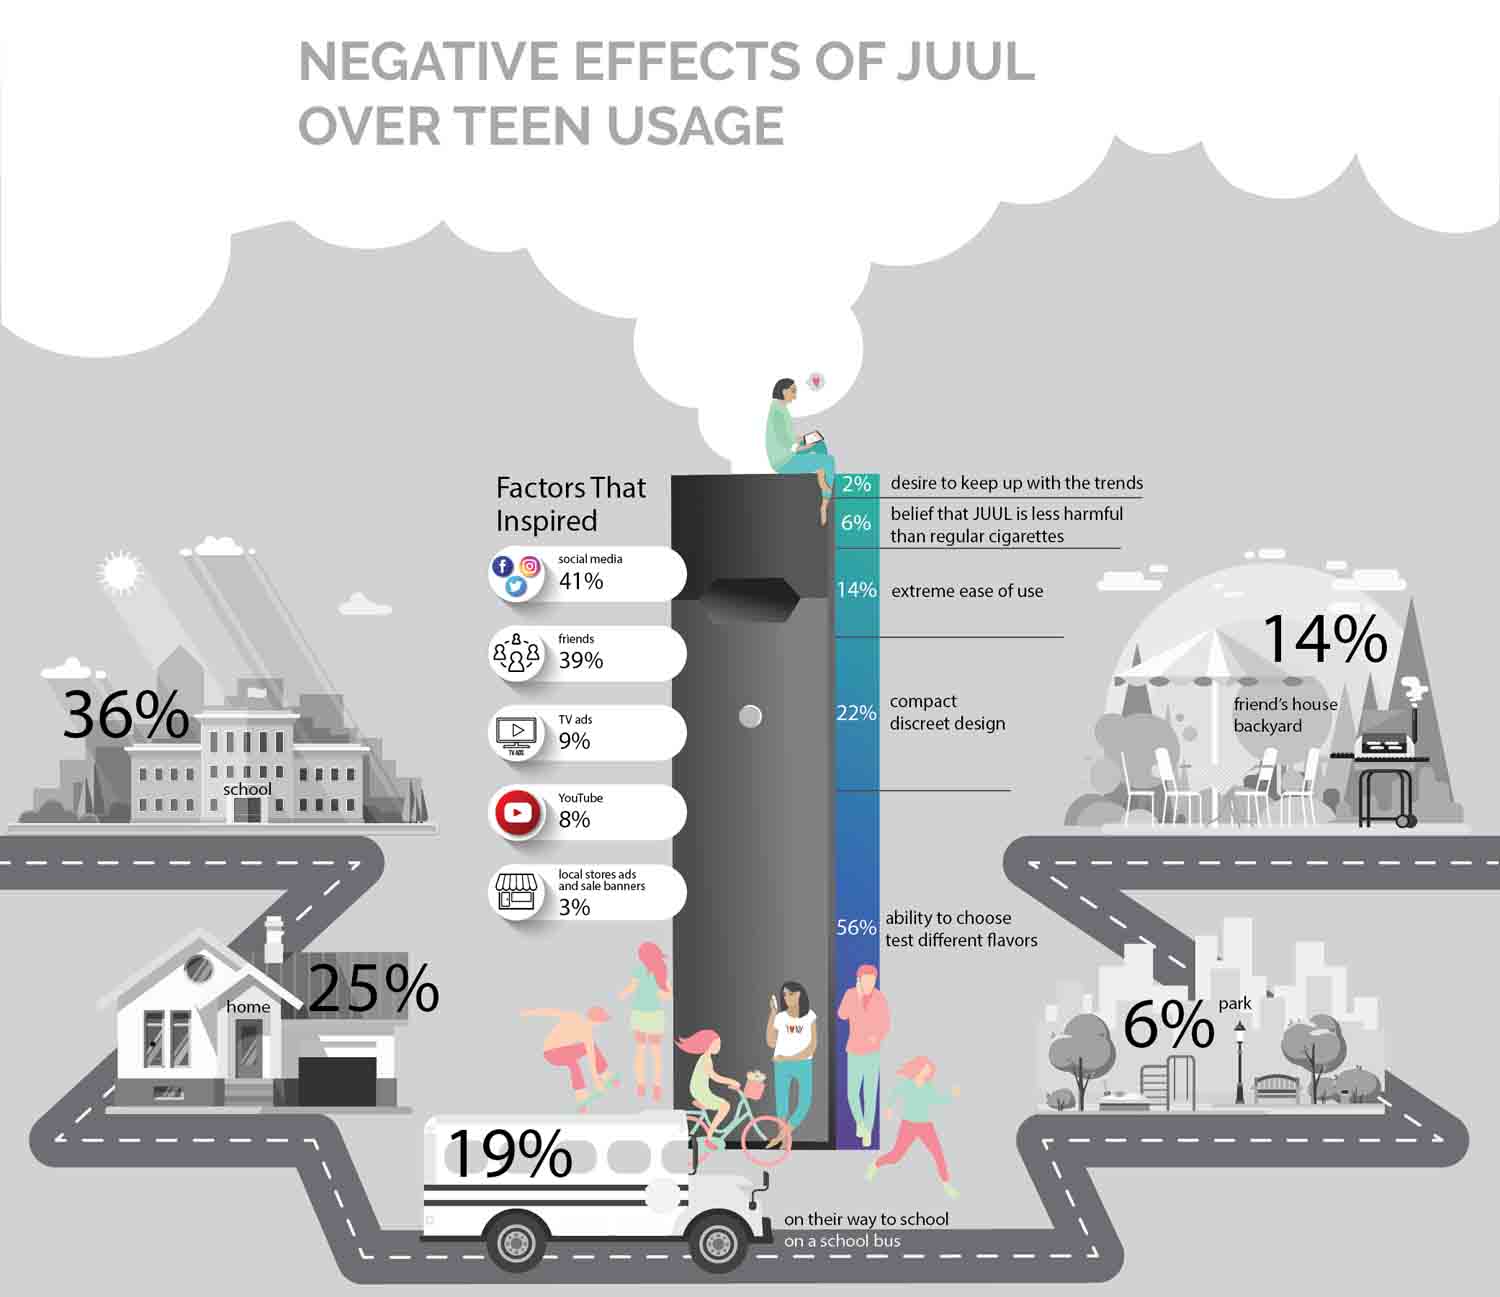 Negative Effects of JUUL Over Teen Usage